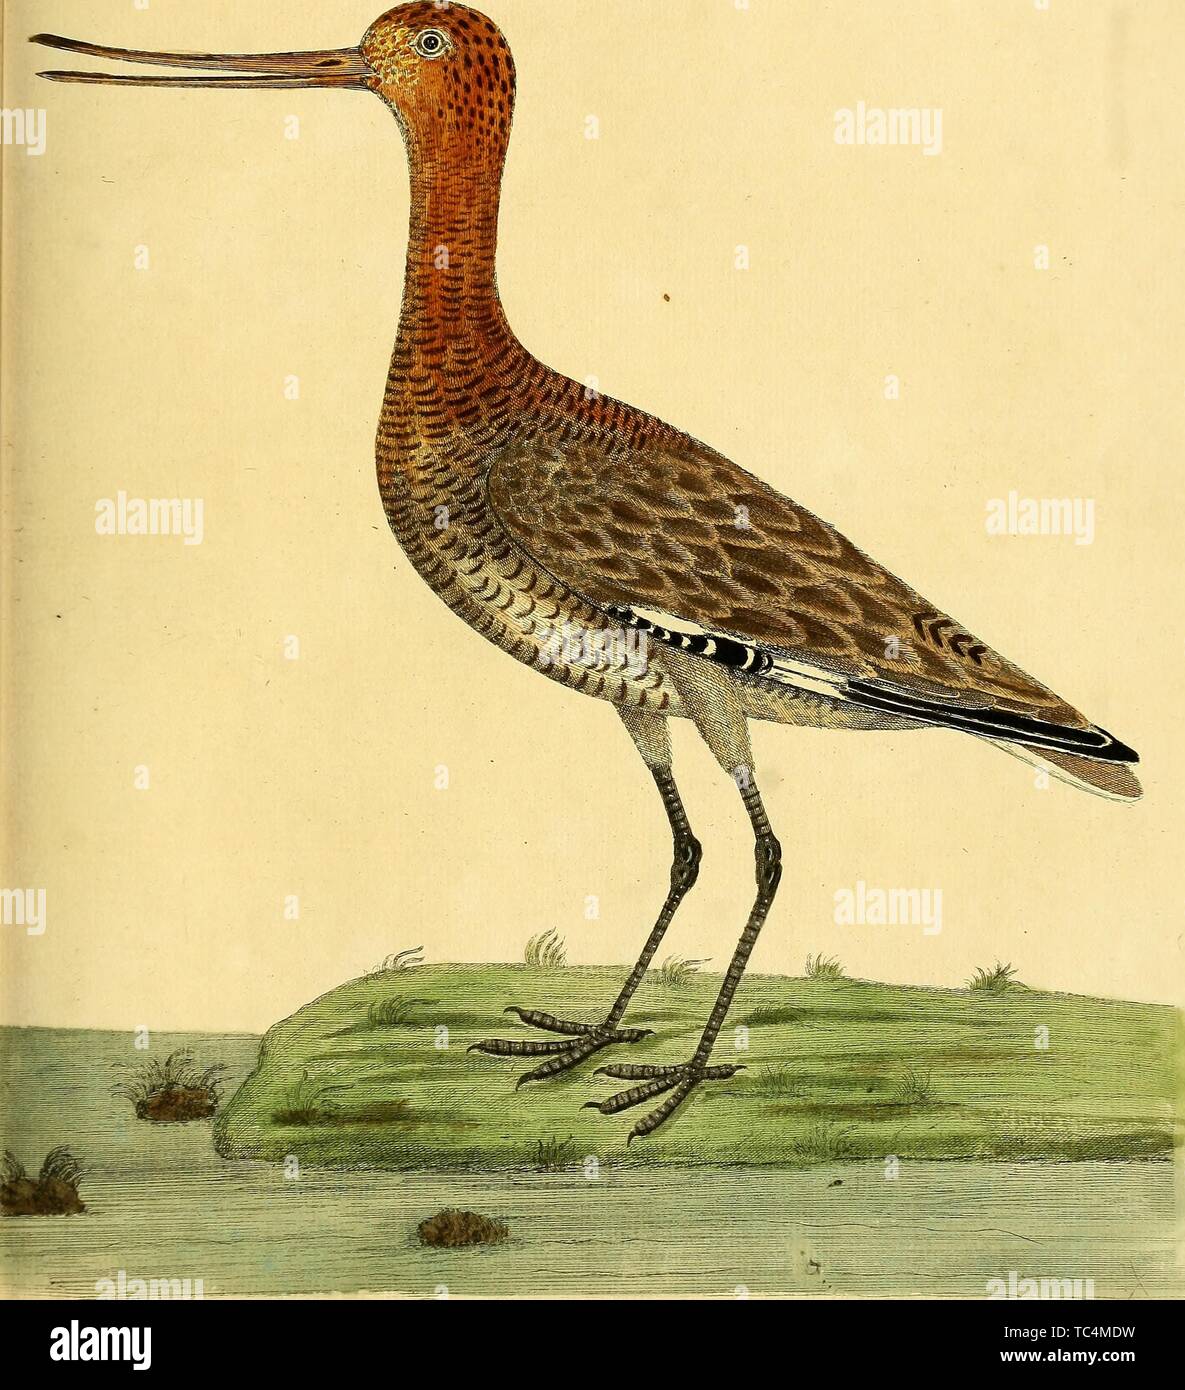 Engraving of the Godwit (Lagocephalus), from the book 'A natural history of birds' by Eleazar Albin, William Derham, and Jonathan Dwight, 1731. Courtesy Internet Archive. () Stock Photo